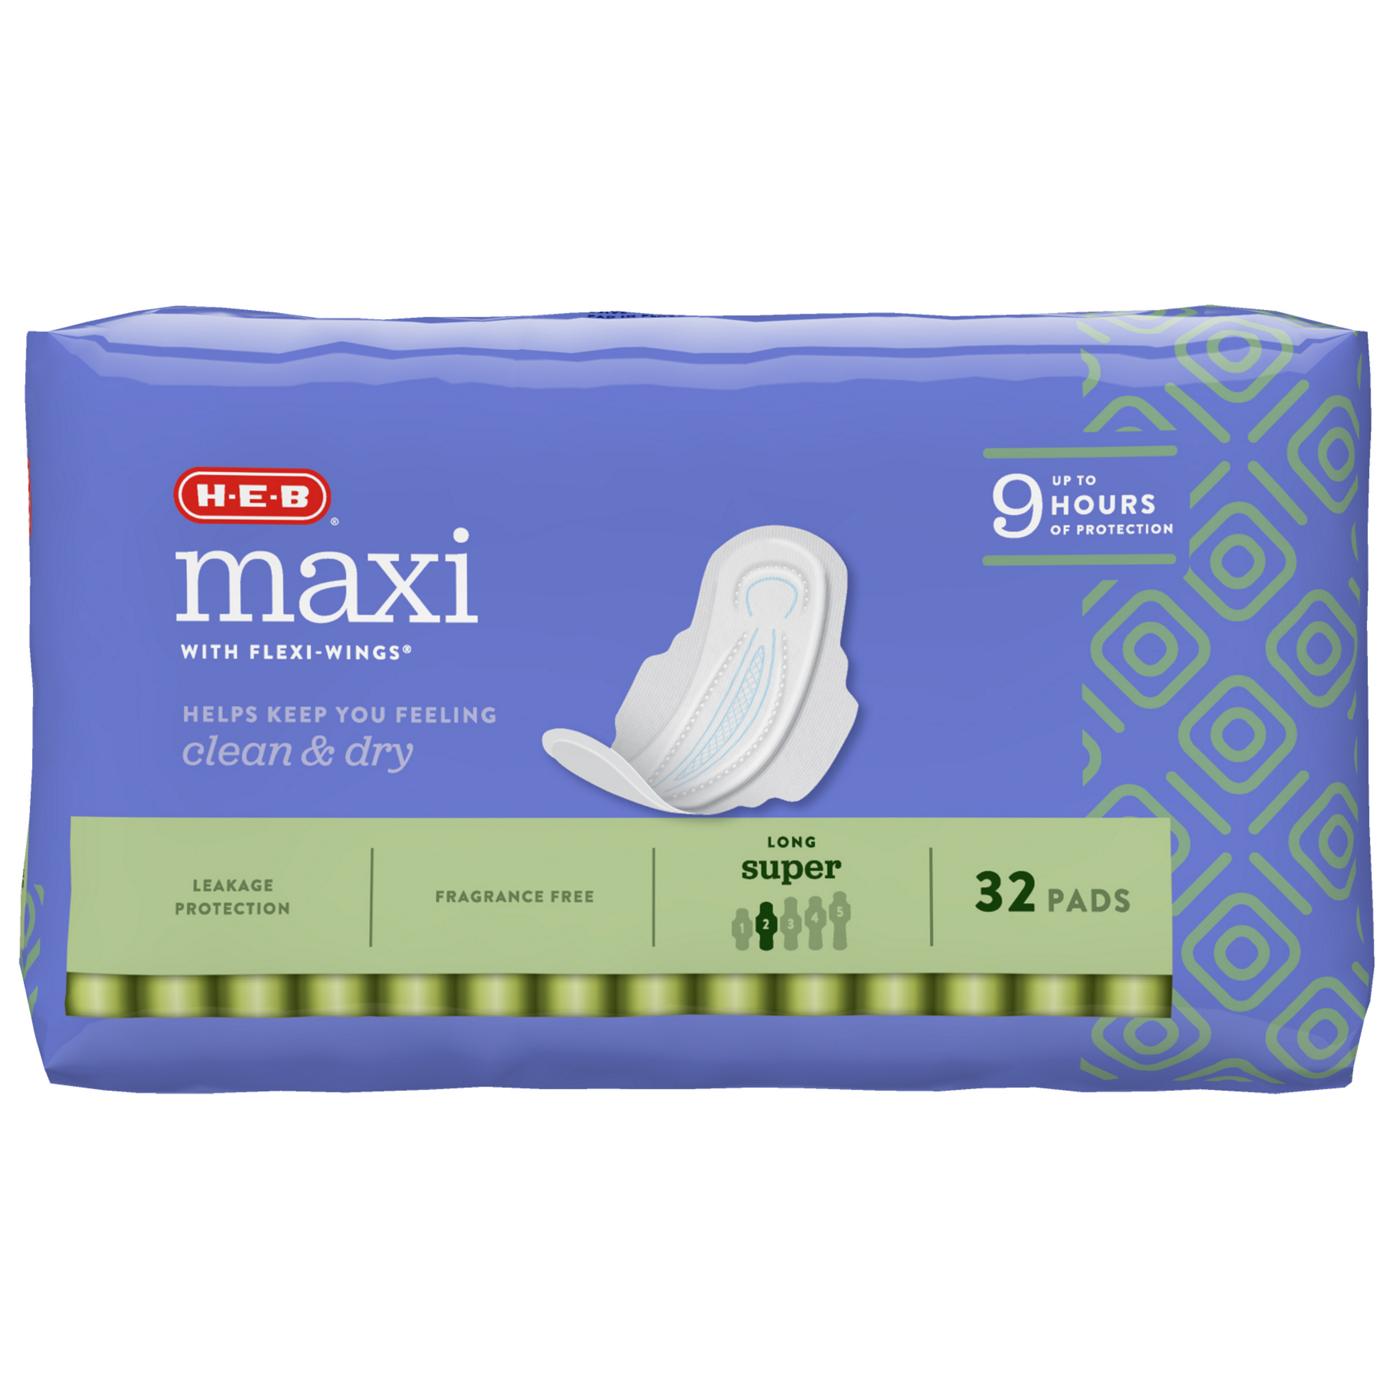 H-E-B Maxi with Flexi-Wings Long Pads - Super; image 8 of 9